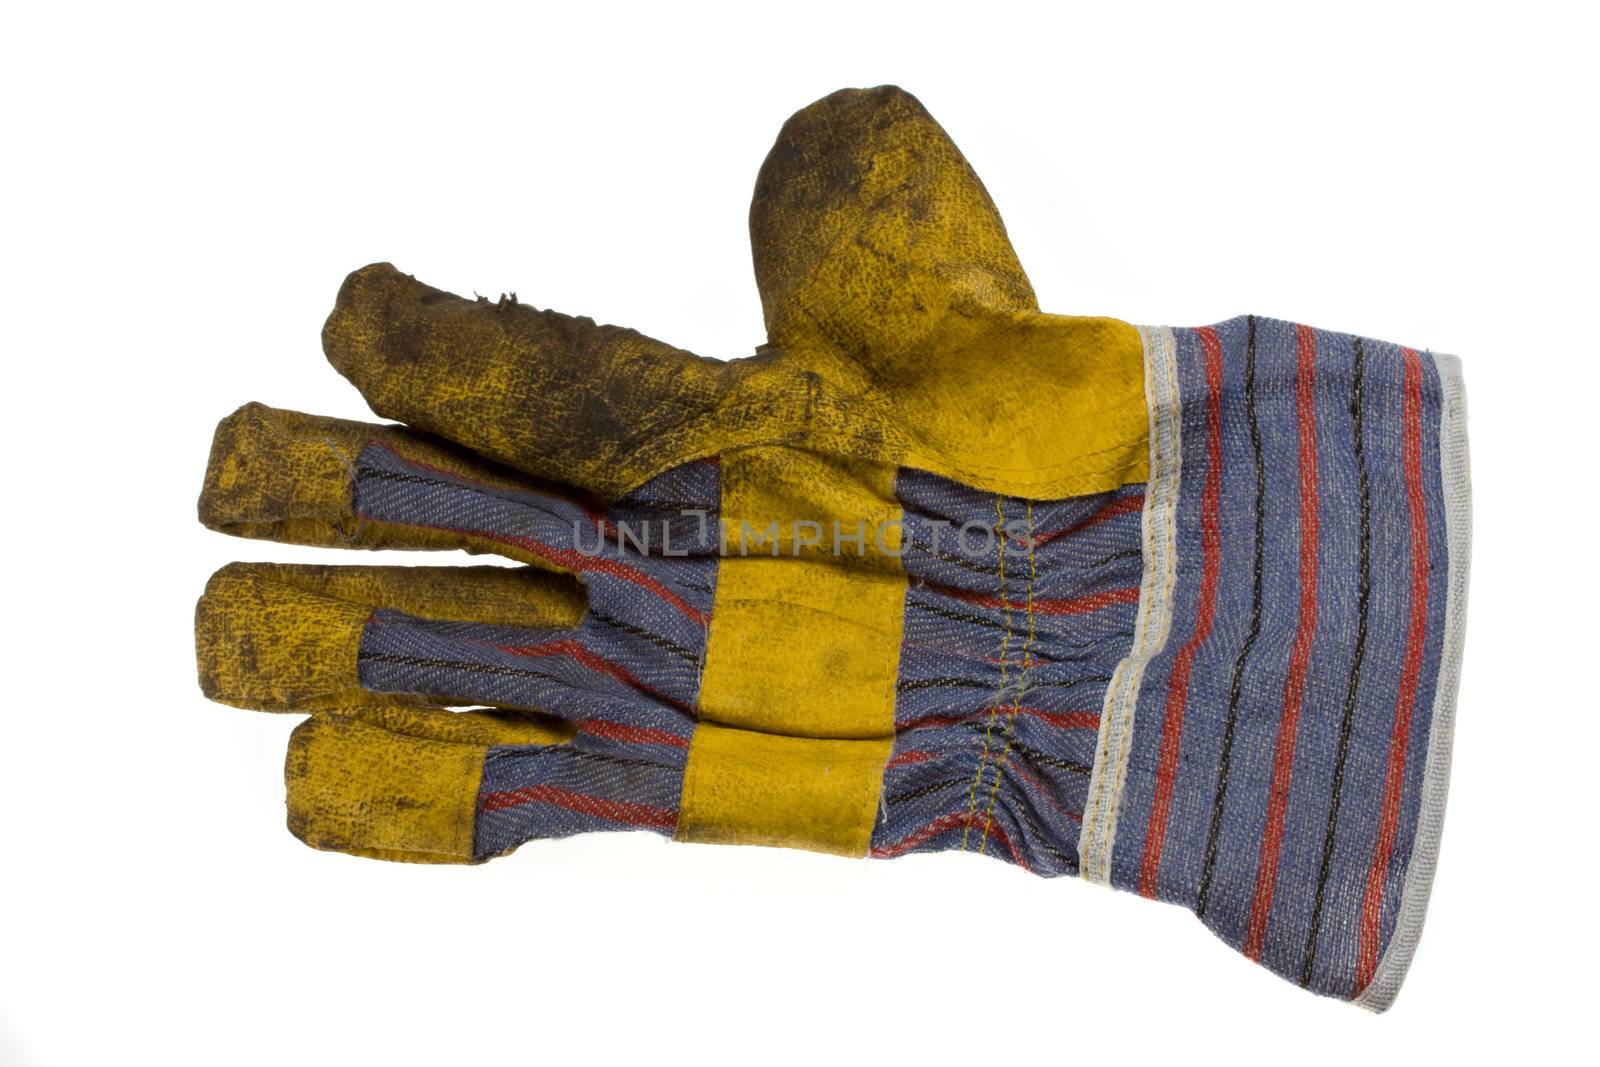 single dirty used work glove isolated on white background